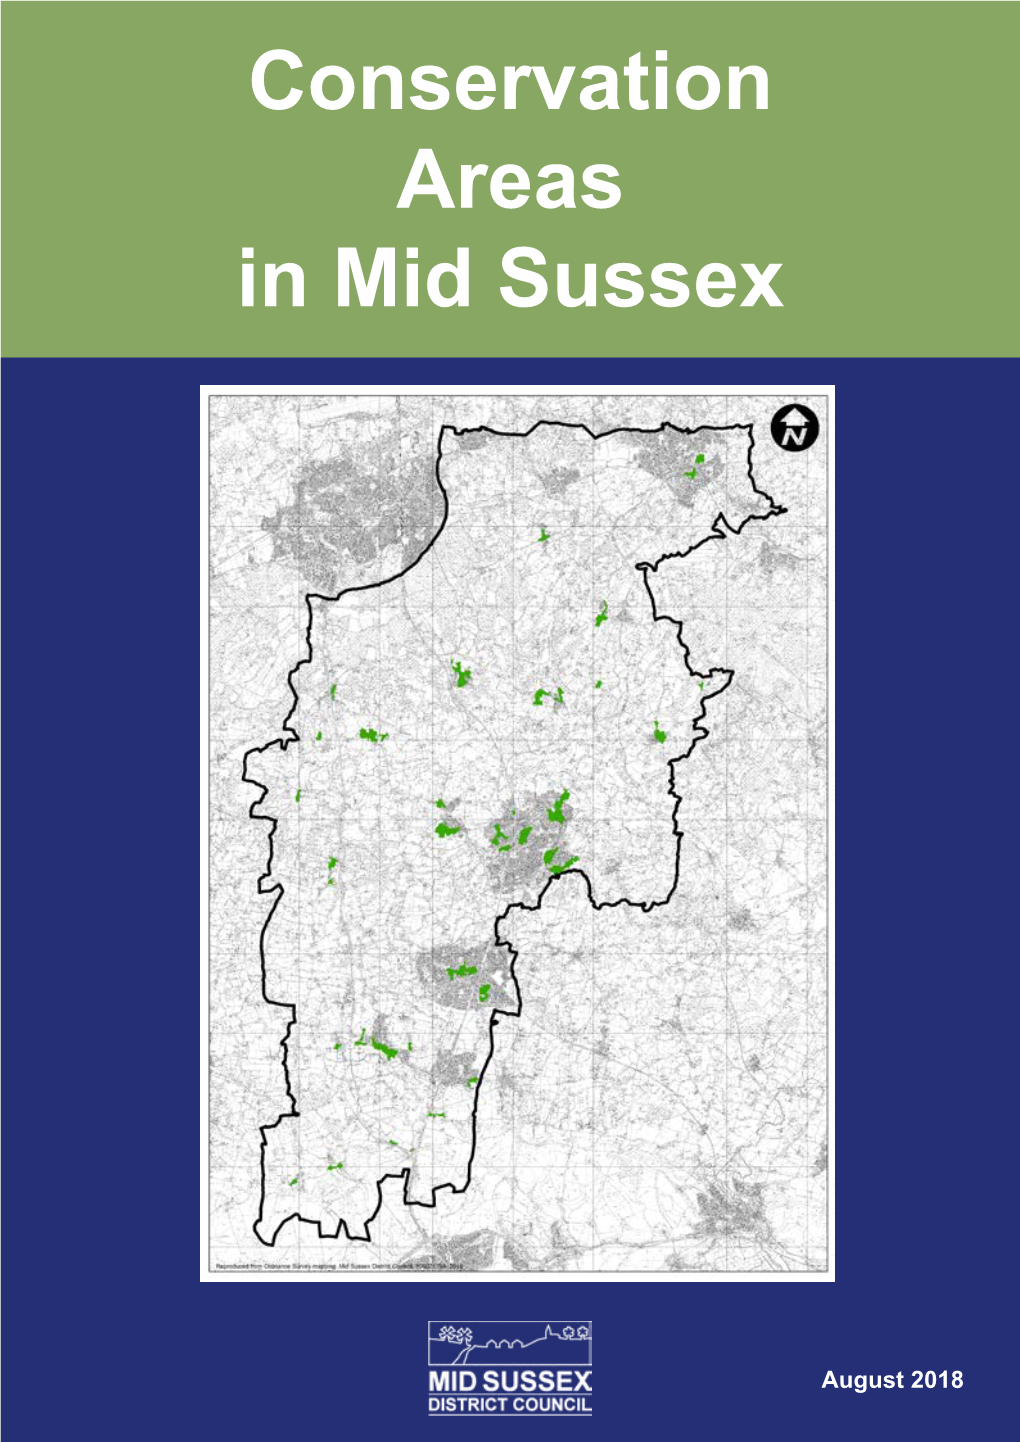 Conservation Areas in Mid Sussex